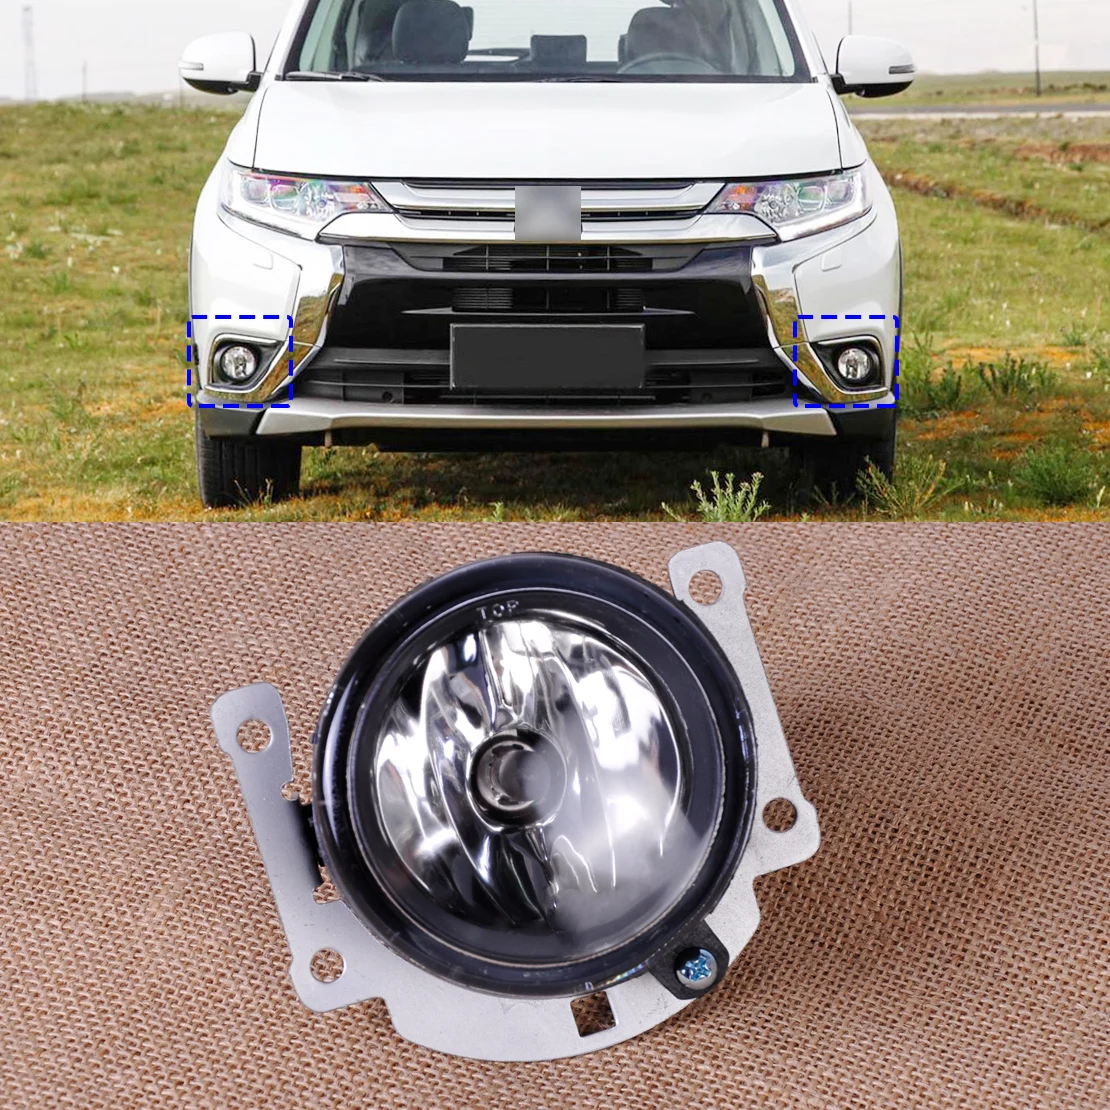 

8321A467 SL870-1 New 1pc Left = Right Front Fog lamp Light Fit for Mitsubishi ASX Outlander Sport RVR